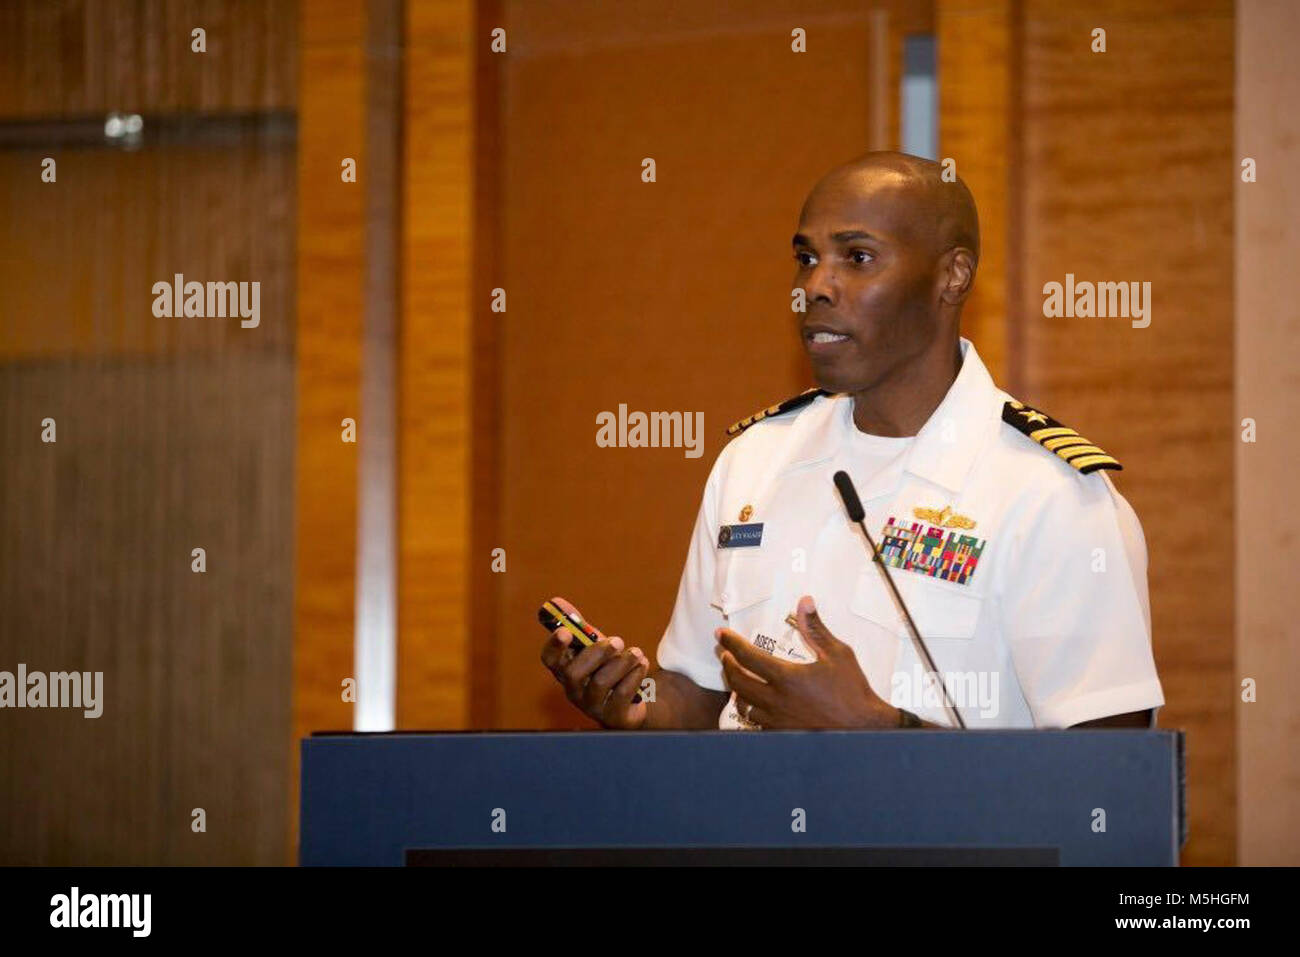 SINGAPORE (February 8, 2018) Capt. Lex Walker, Commodore of Destroyer Squadron (DESRON) 7 along with Capt. Azhar bin Baharum, Assistance Chief of Staff of Operations in the Royal Malaysian Navy, and Capt. Didong Rio Duta, Commanding Officer of Escort Squadron in the Indonesian Navy, speak at a panel discussion during the Asia Defense Expo and Conference Series (ADECS) 2018 in Singapore about utilizing innovative simulation technology towards training and sustaining a ready and adaptive Naval force. ( Stock Photo